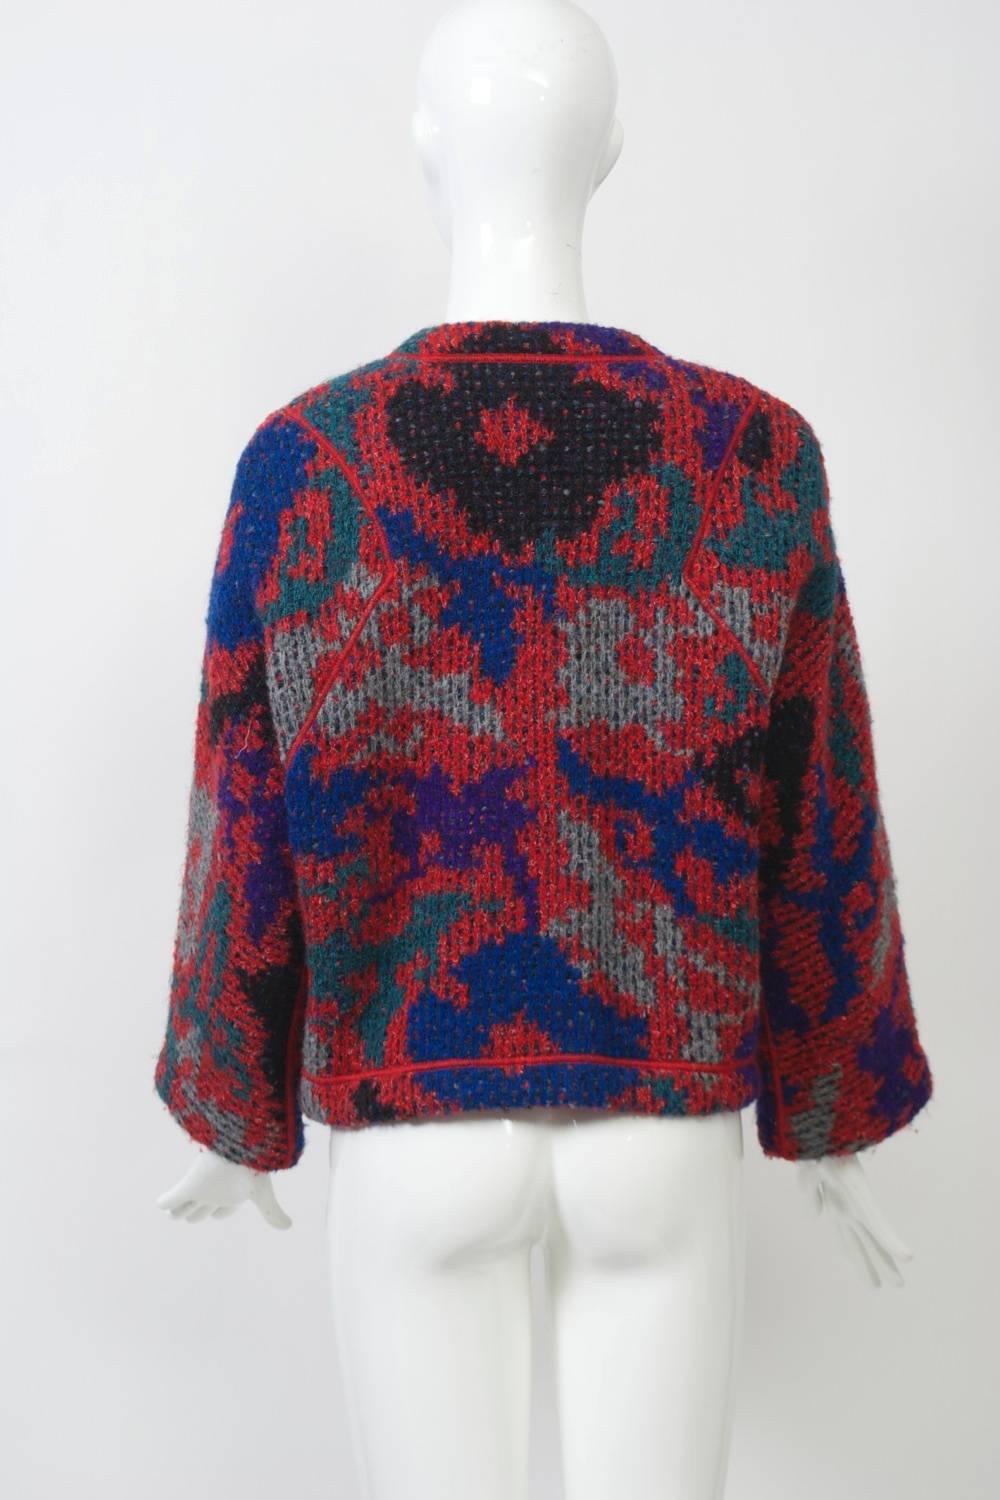 Missoni jacket in predominantly red/blue print with red stitched borders and red plastic amoebic-shaped buttons. Thick knit, unlined, with round collar and patch pockets. Alpaca/wool/mohair blend.